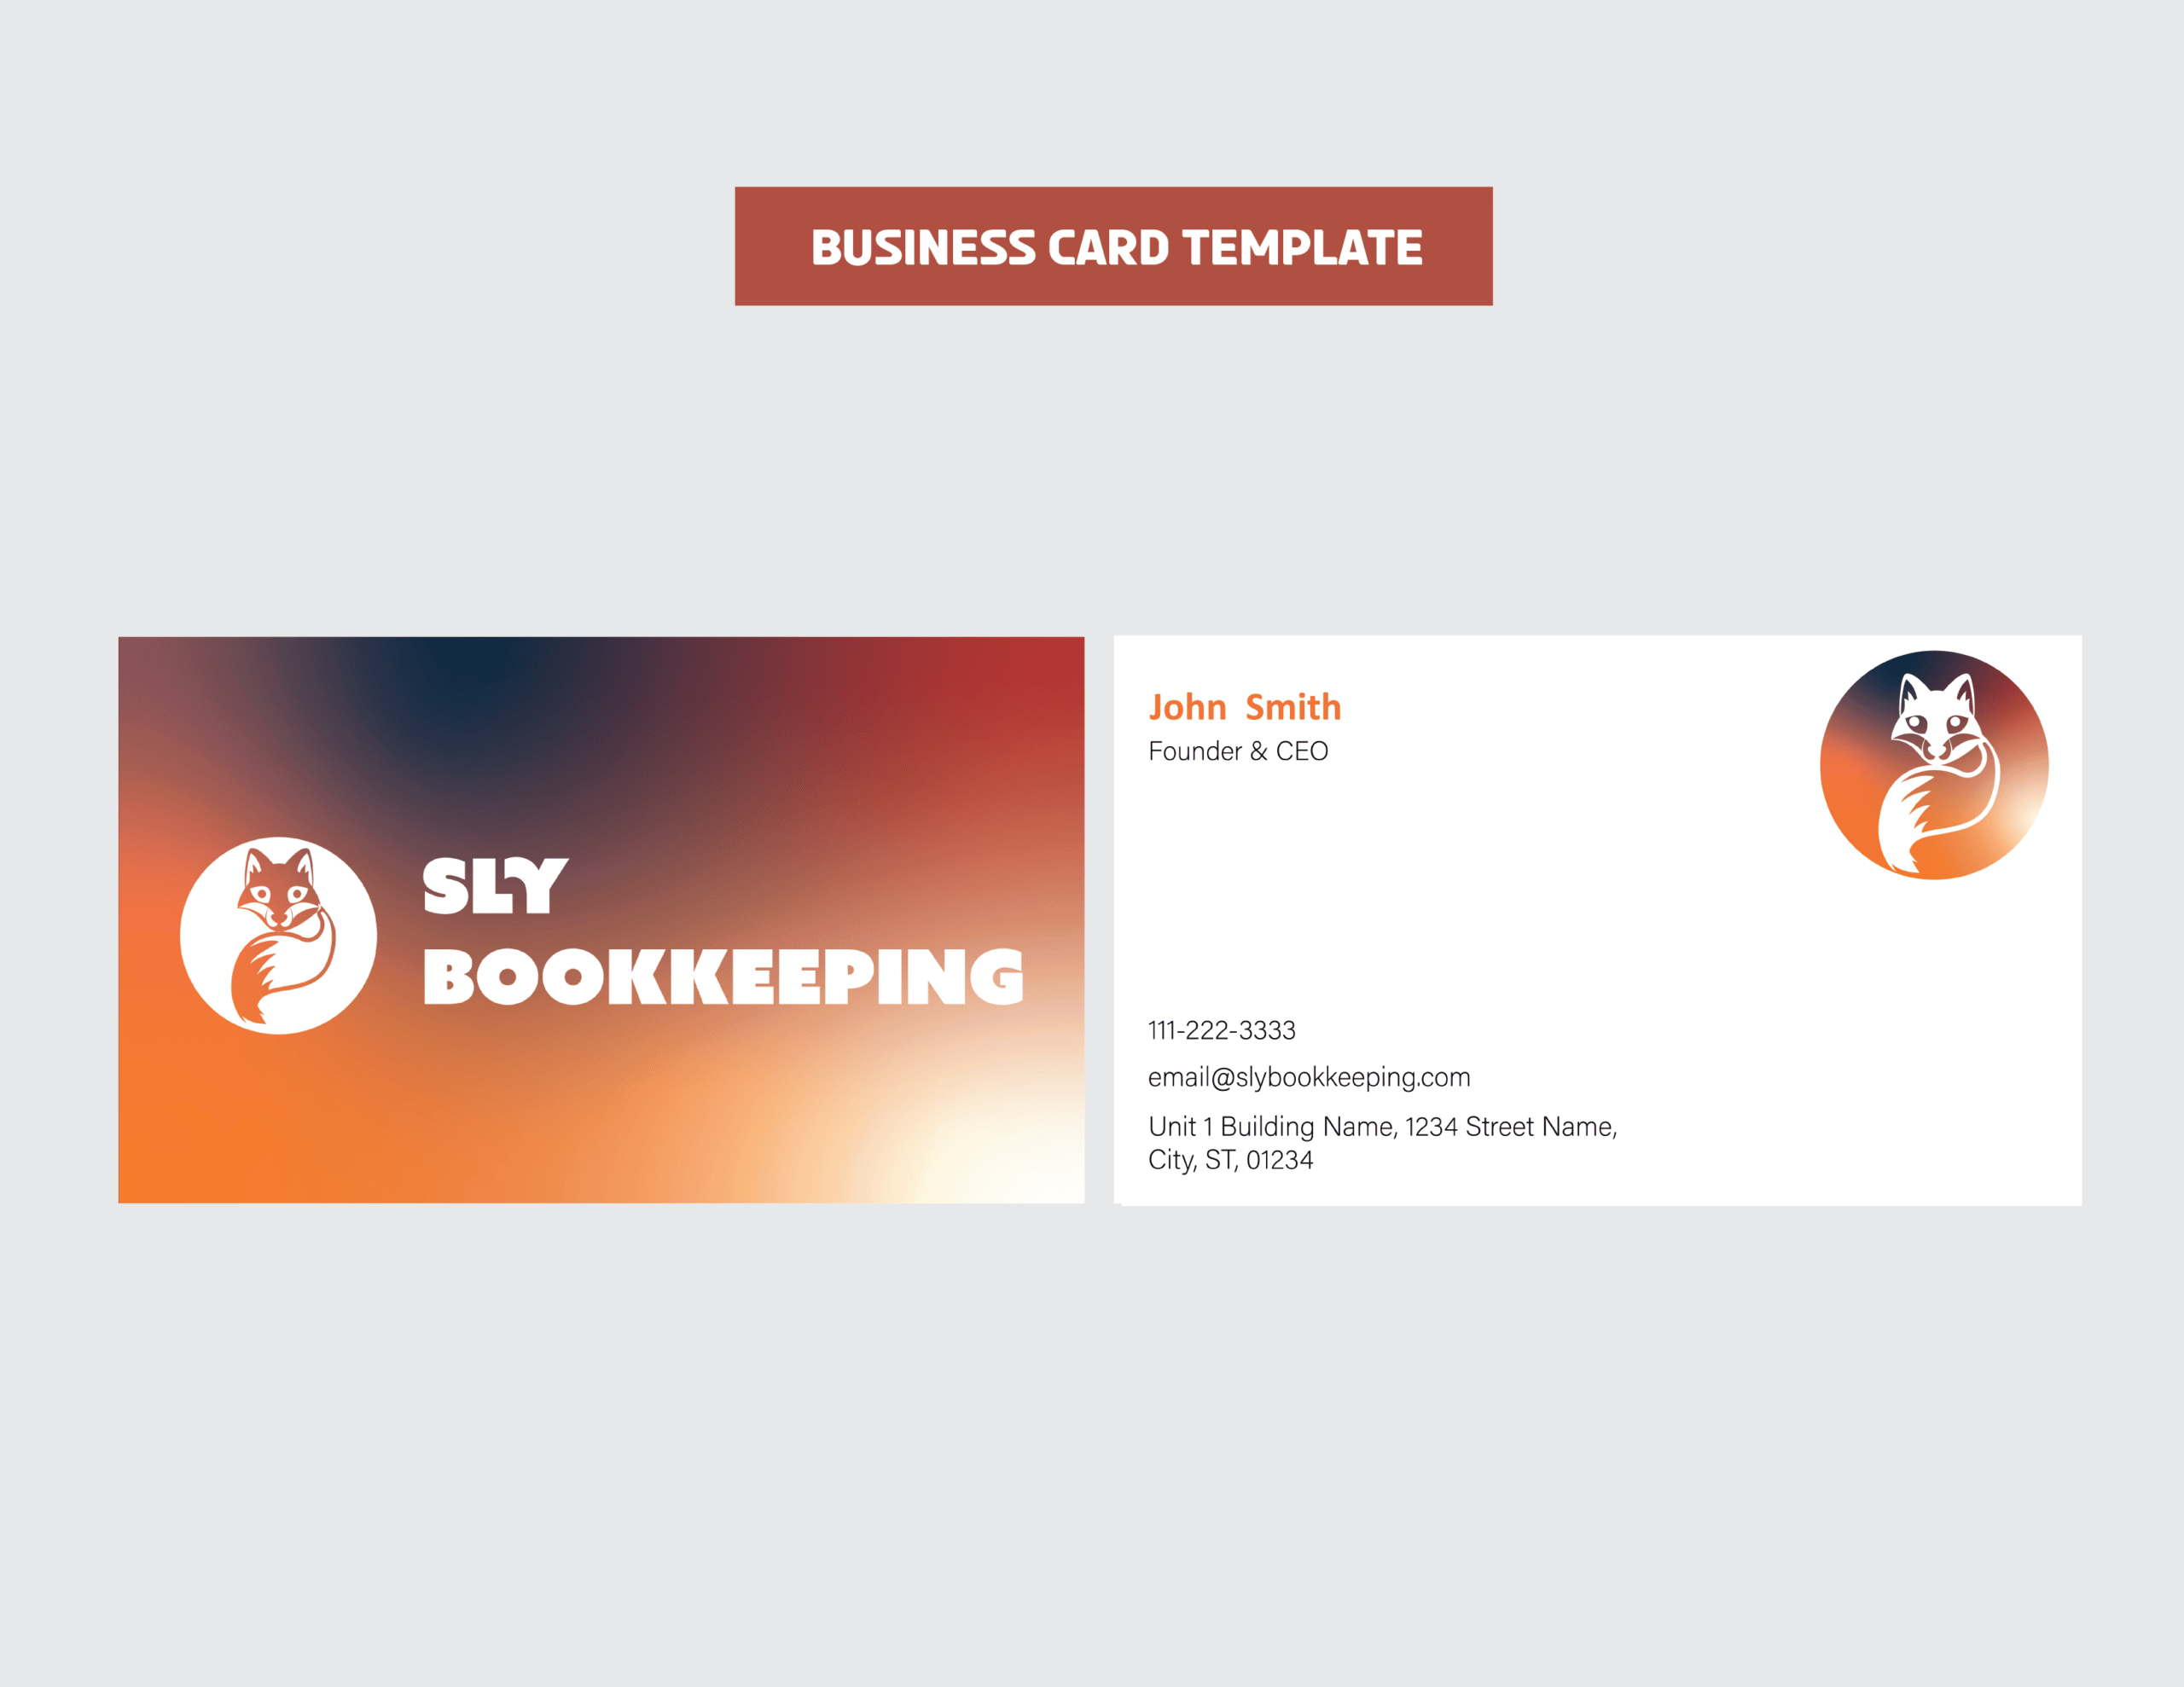 04_SlyBookkeeping_Business Card Template